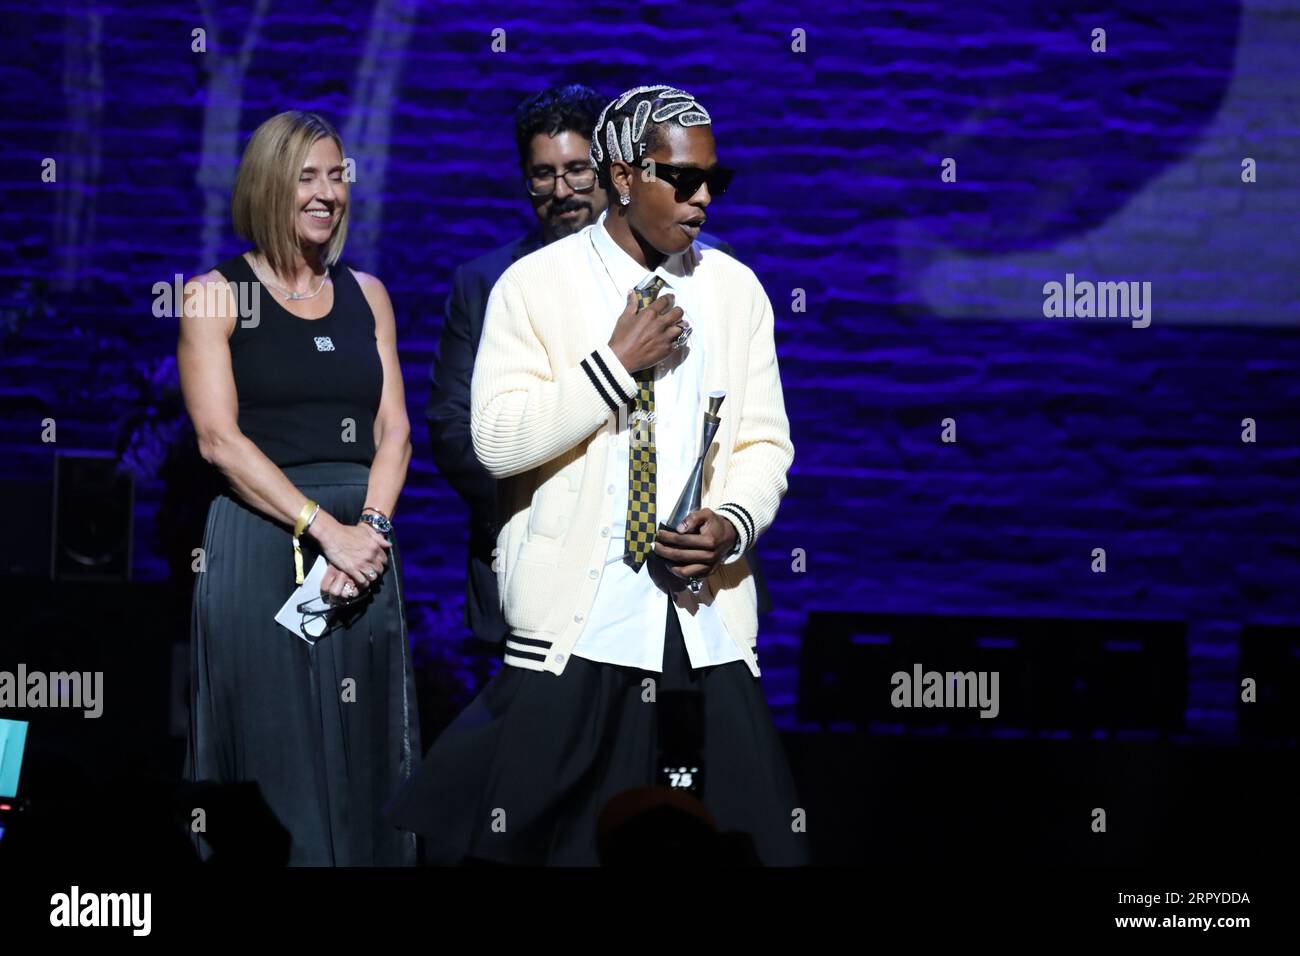 ASAP Rocky Honored With Virgil Abloh Award